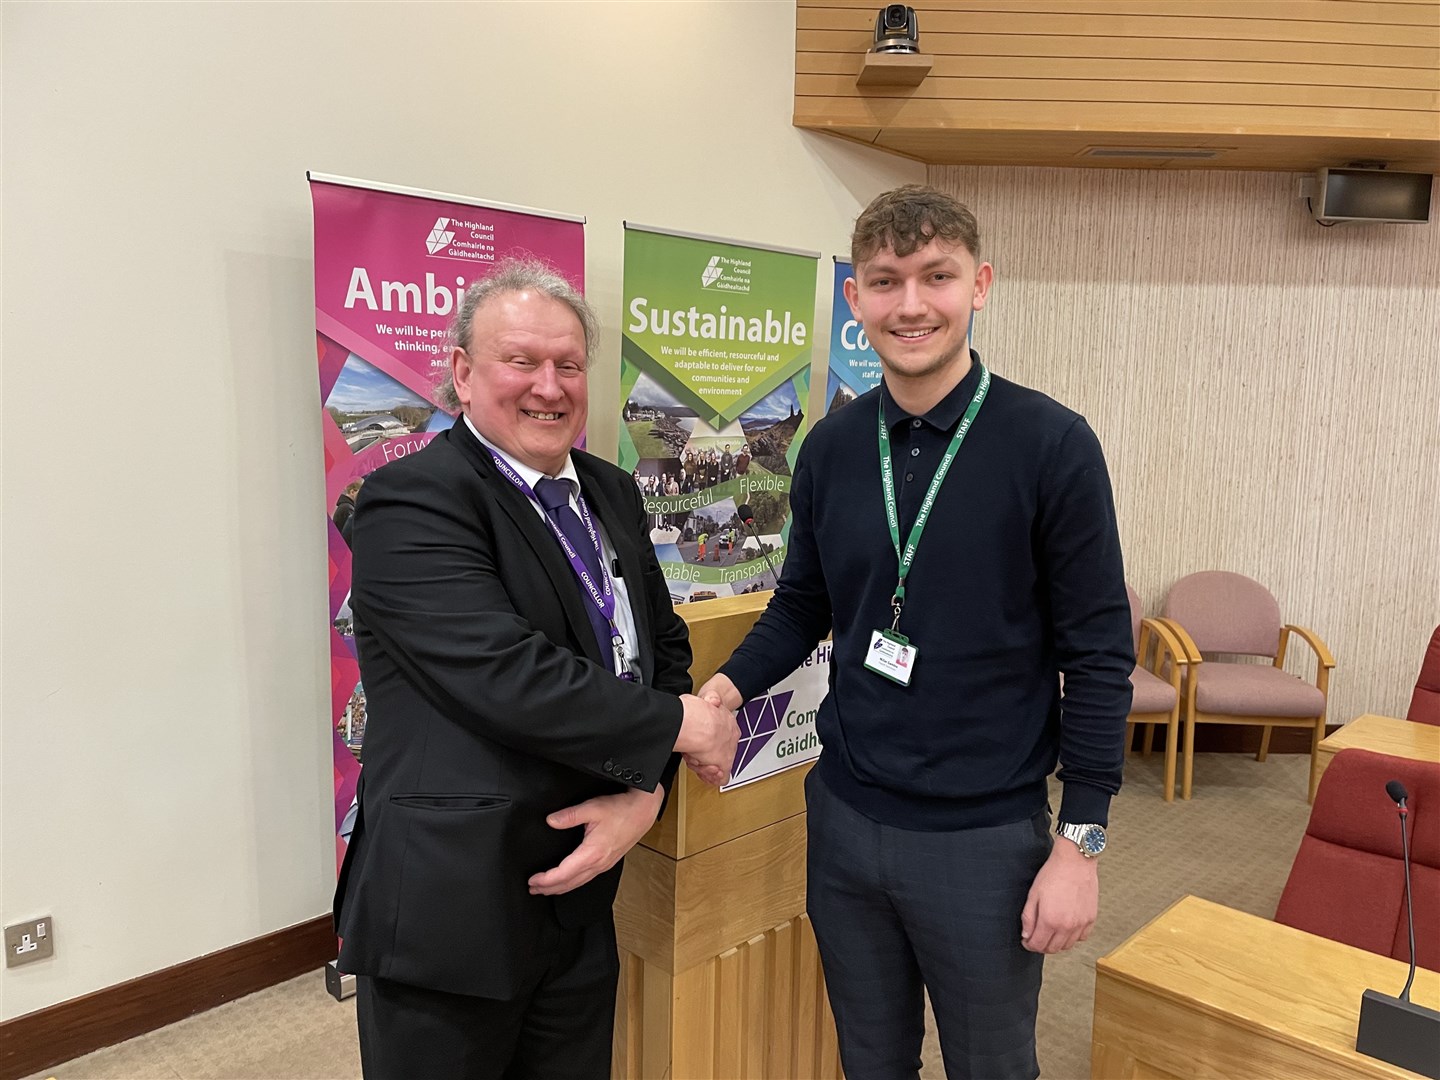 Millar is congratulated by the chairman of the Corporate Resources Committee, Cllr Derek Louden, who is a Tain and Easter Ross councillor.